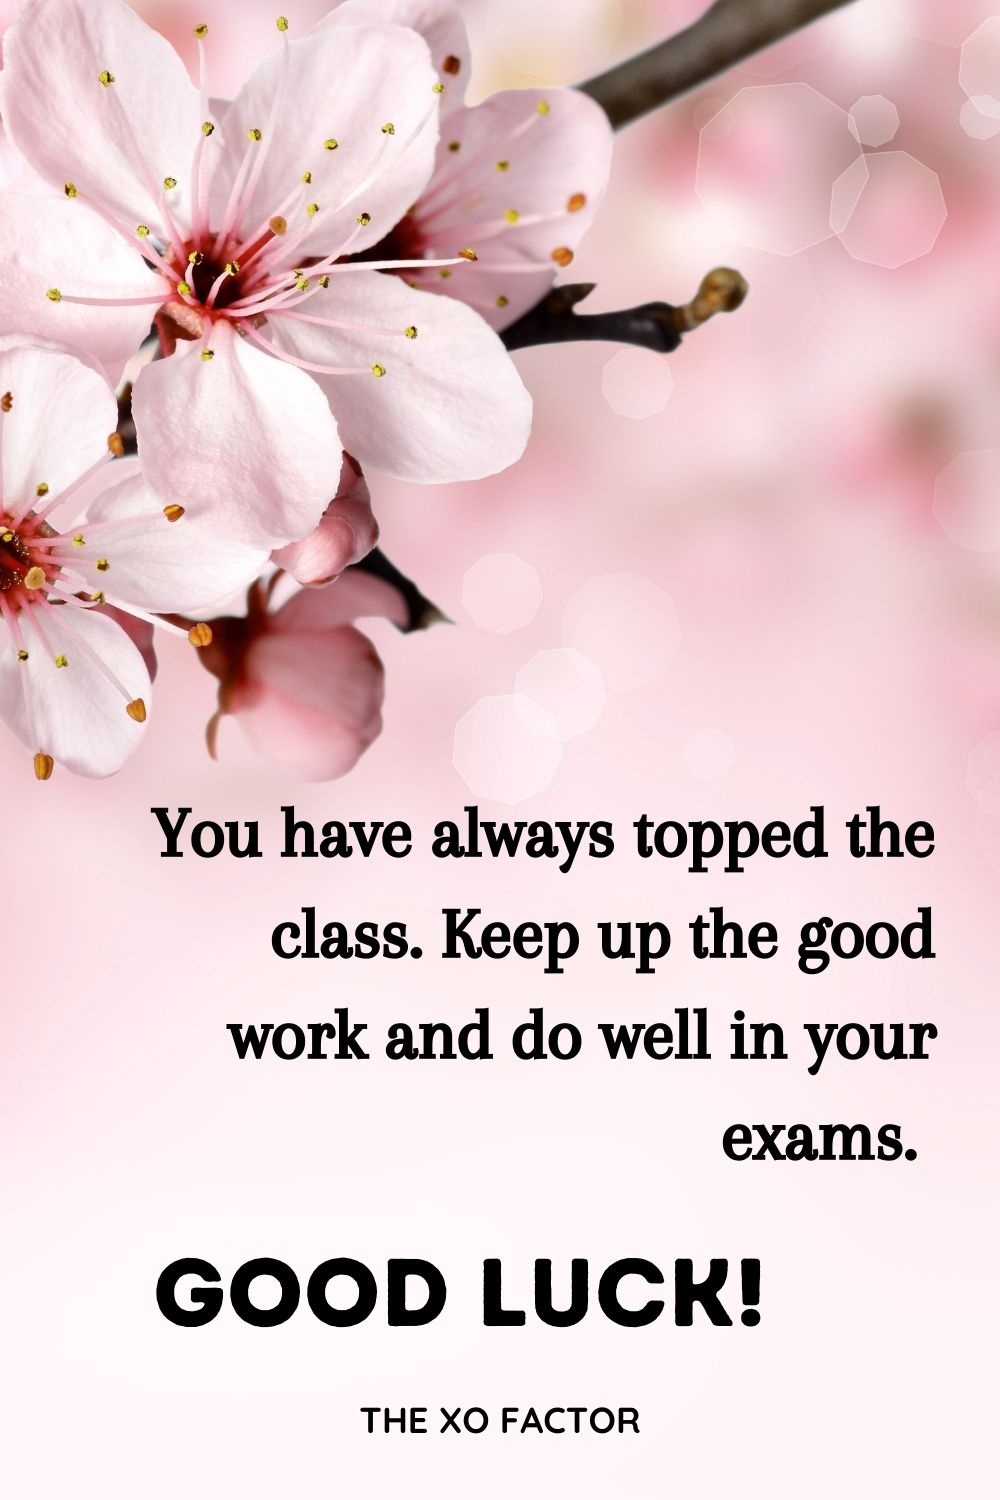 You have always topped the class. Keep up the good work and do well in your exams. Good luck!